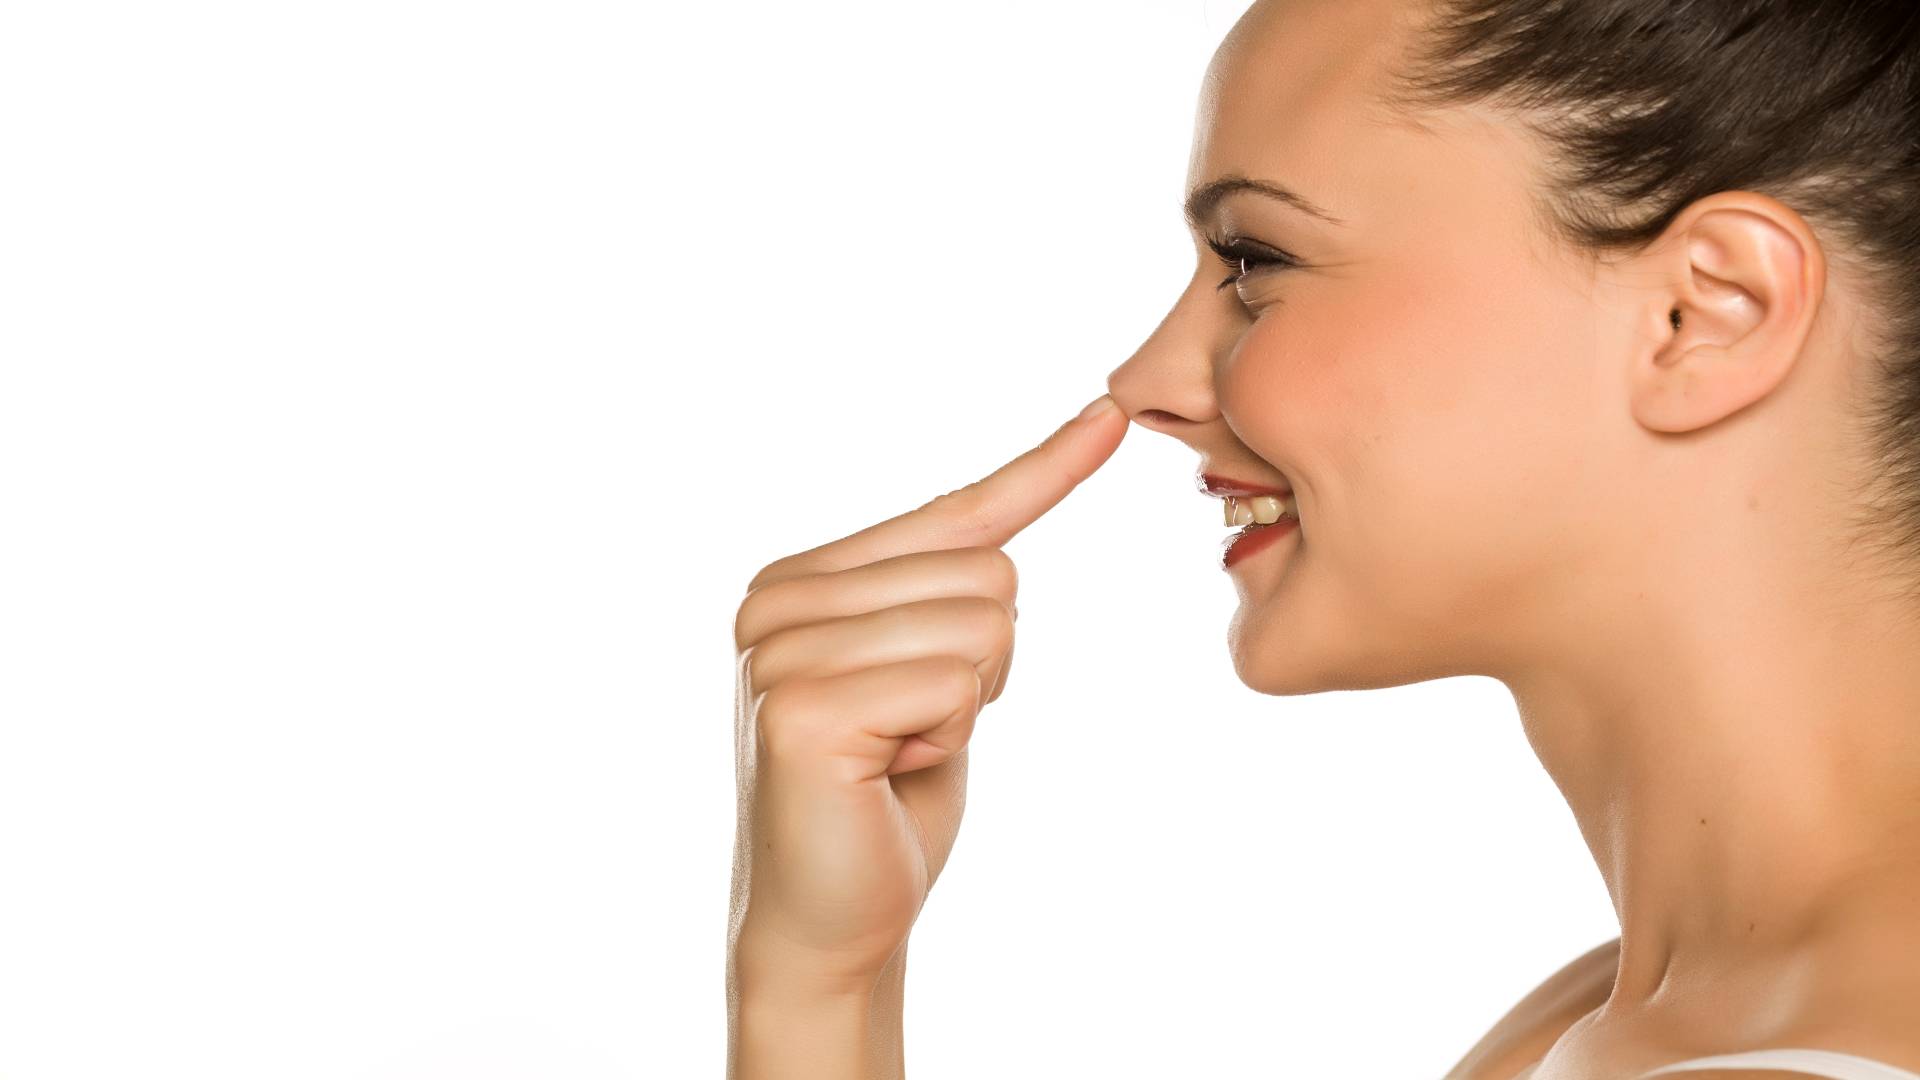 All Things You Need to Know About Rhinoplasty